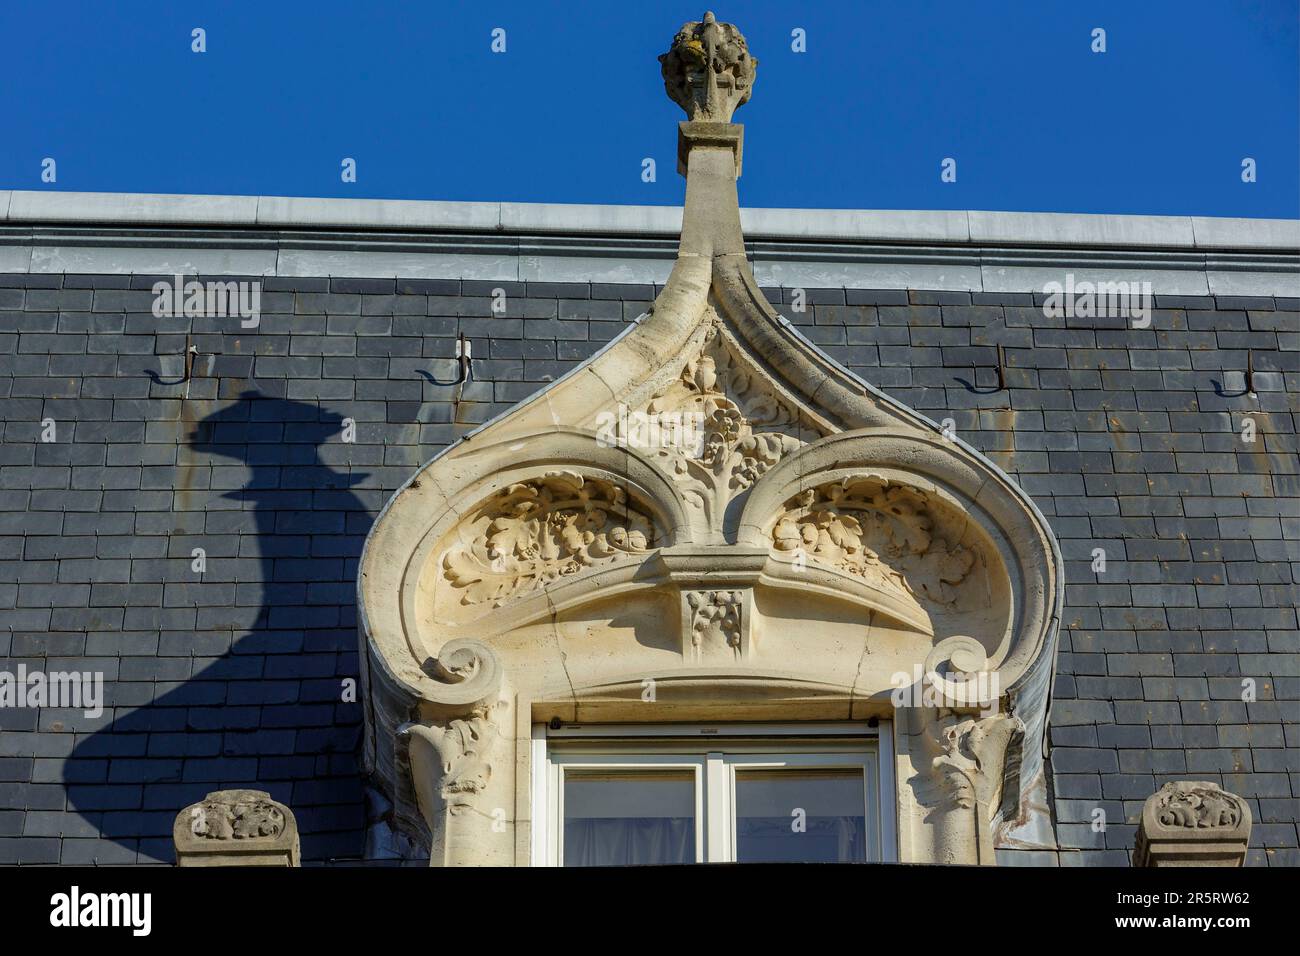 France, Meurthe et Moselle, Nancy, detail of the gabled dormer in Art Nouveau style of the Maison Bloch built between 1909 and 1910 after the plans of architect Charles Desire Bourgon for Auguste Bloch, a food manufacturer, located Cours Leopold Stock Photo